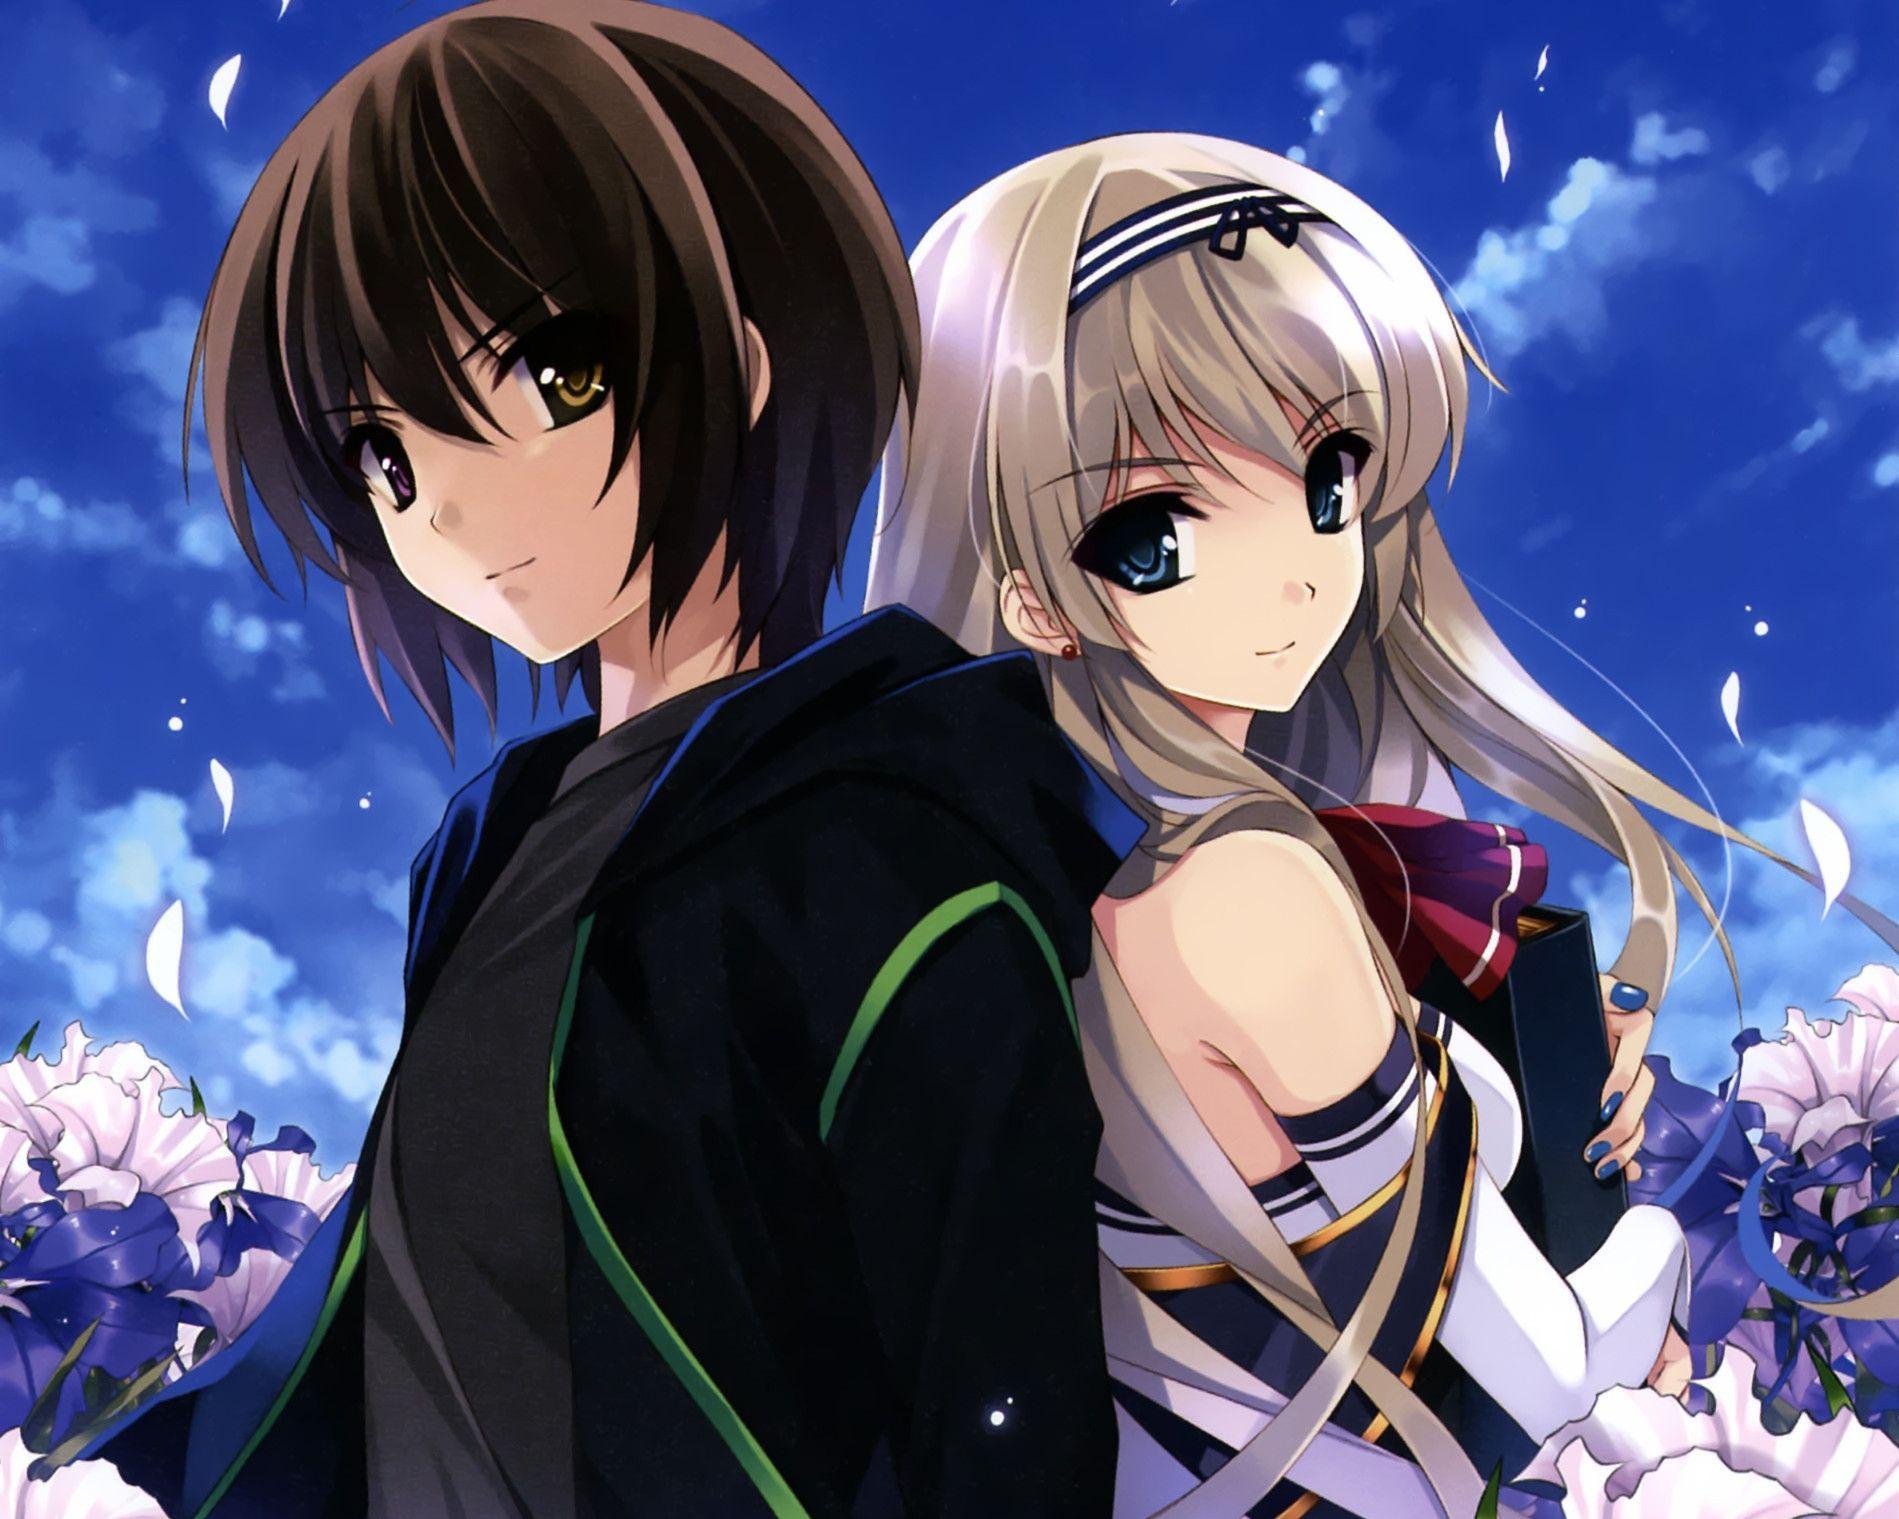 Beautiful Anime Couples Wallpaper Free Beautiful Anime Couples Background